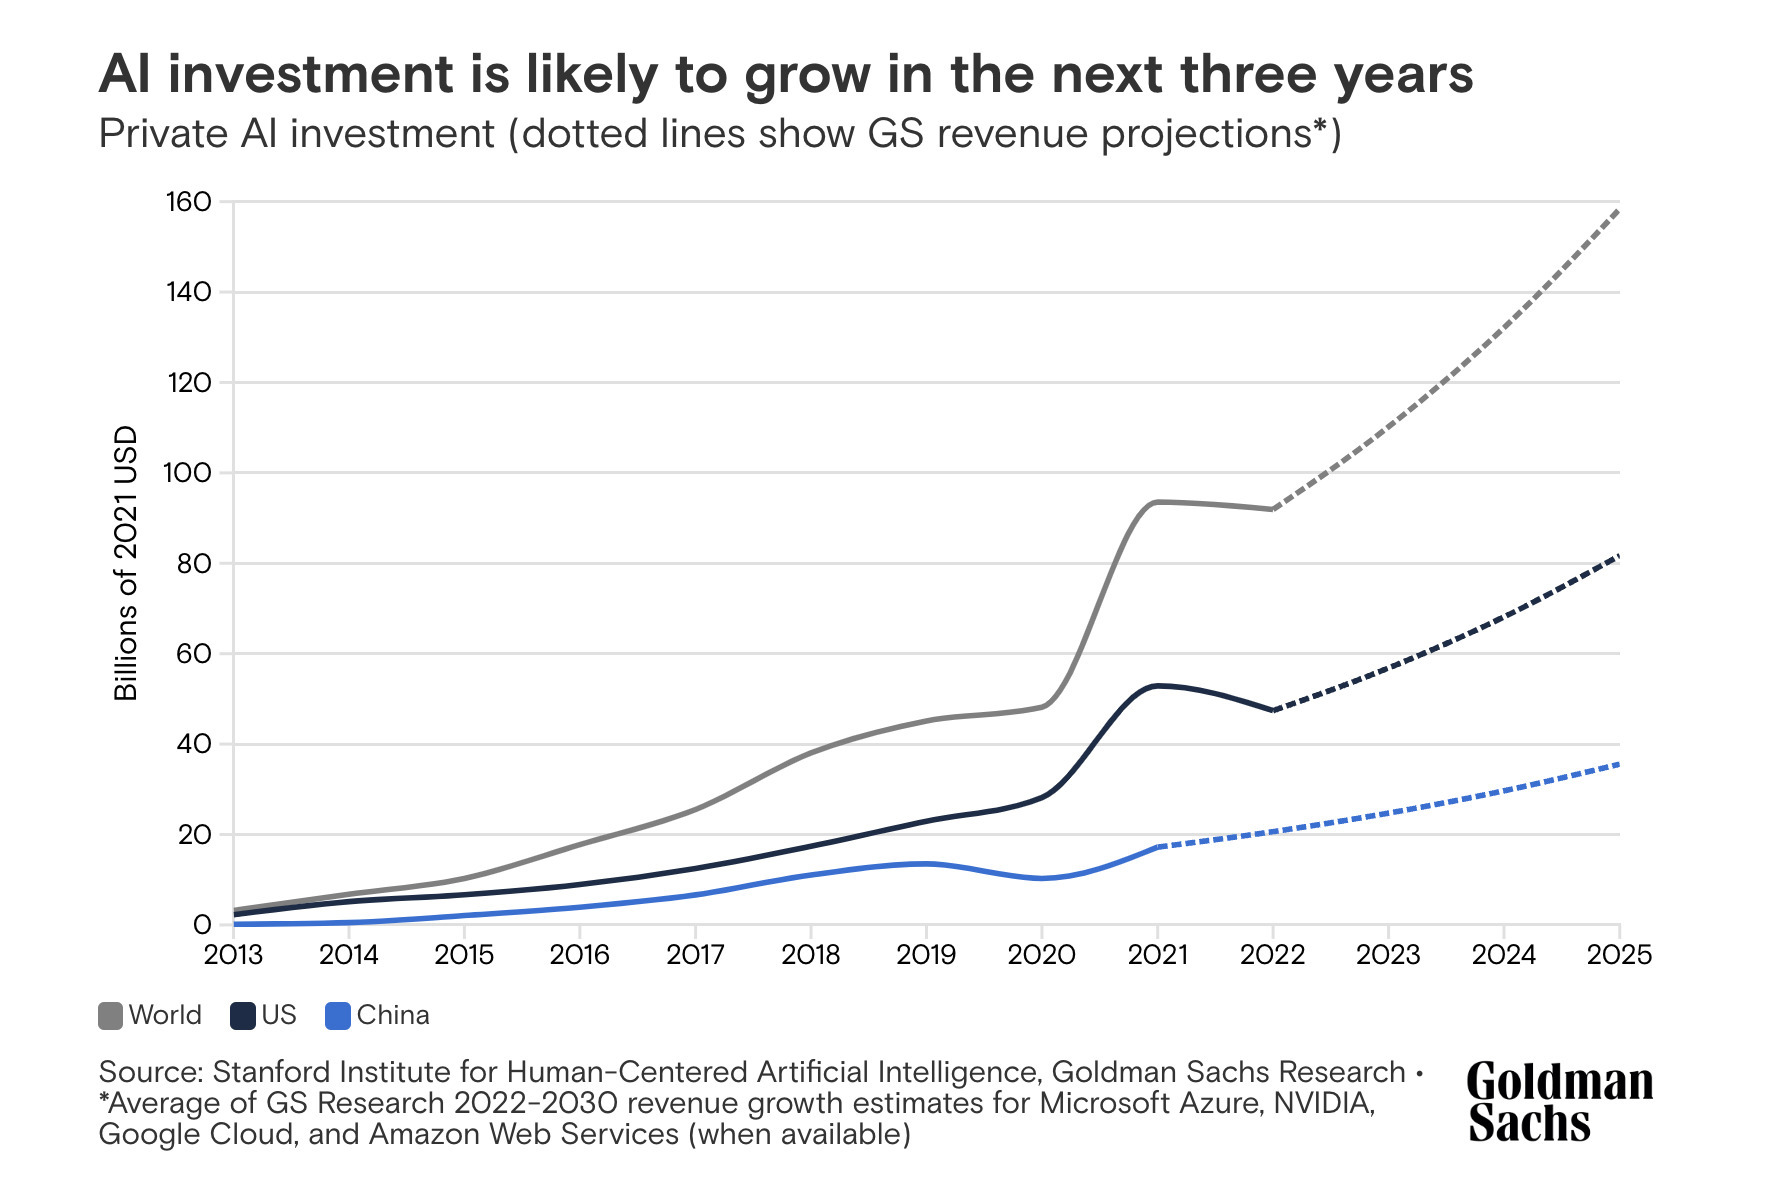 Goldman Sachs Investment Projections